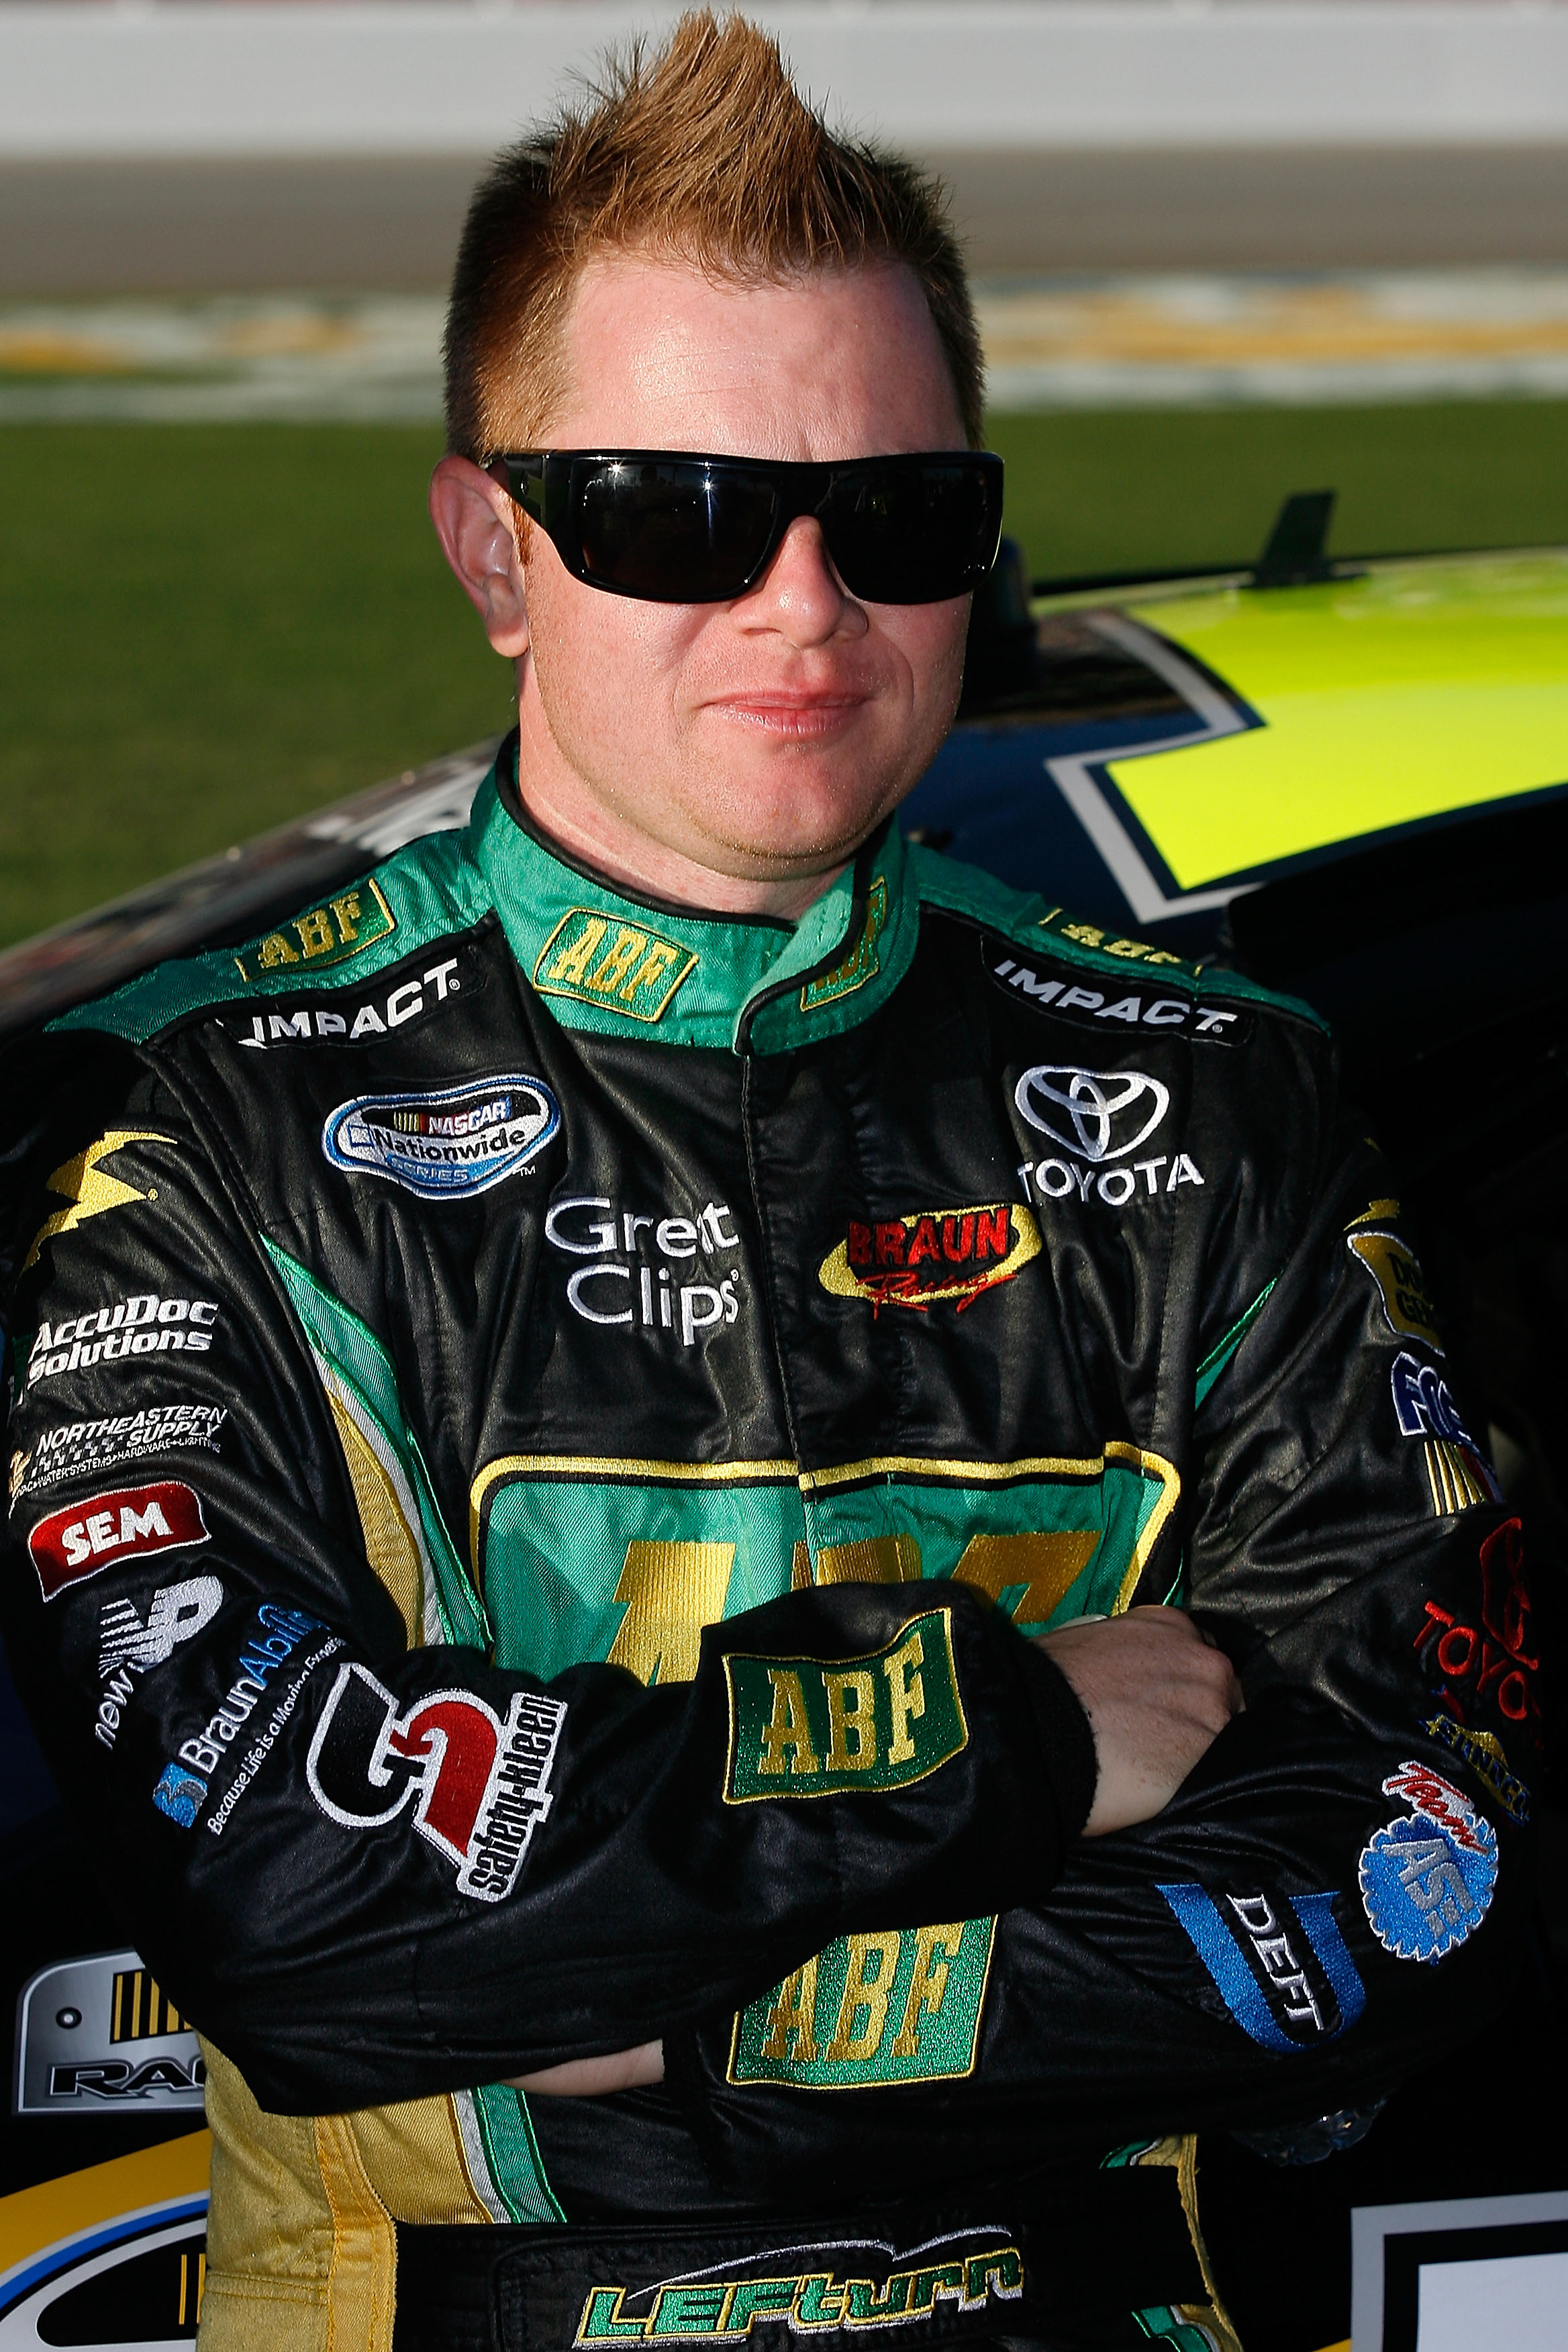 HAMPTON, GA - SEPTEMBER 04:  Jason Leffler, driver of the #10 ABF Toyota, stands on the grid prior to the start of the NASCAR Nationwide Series Great Clips 300 at Atlanta Motor Speedway on September 4, 2010 in Hampton, Georgia.  (Photo by Tom Whitmore/Get